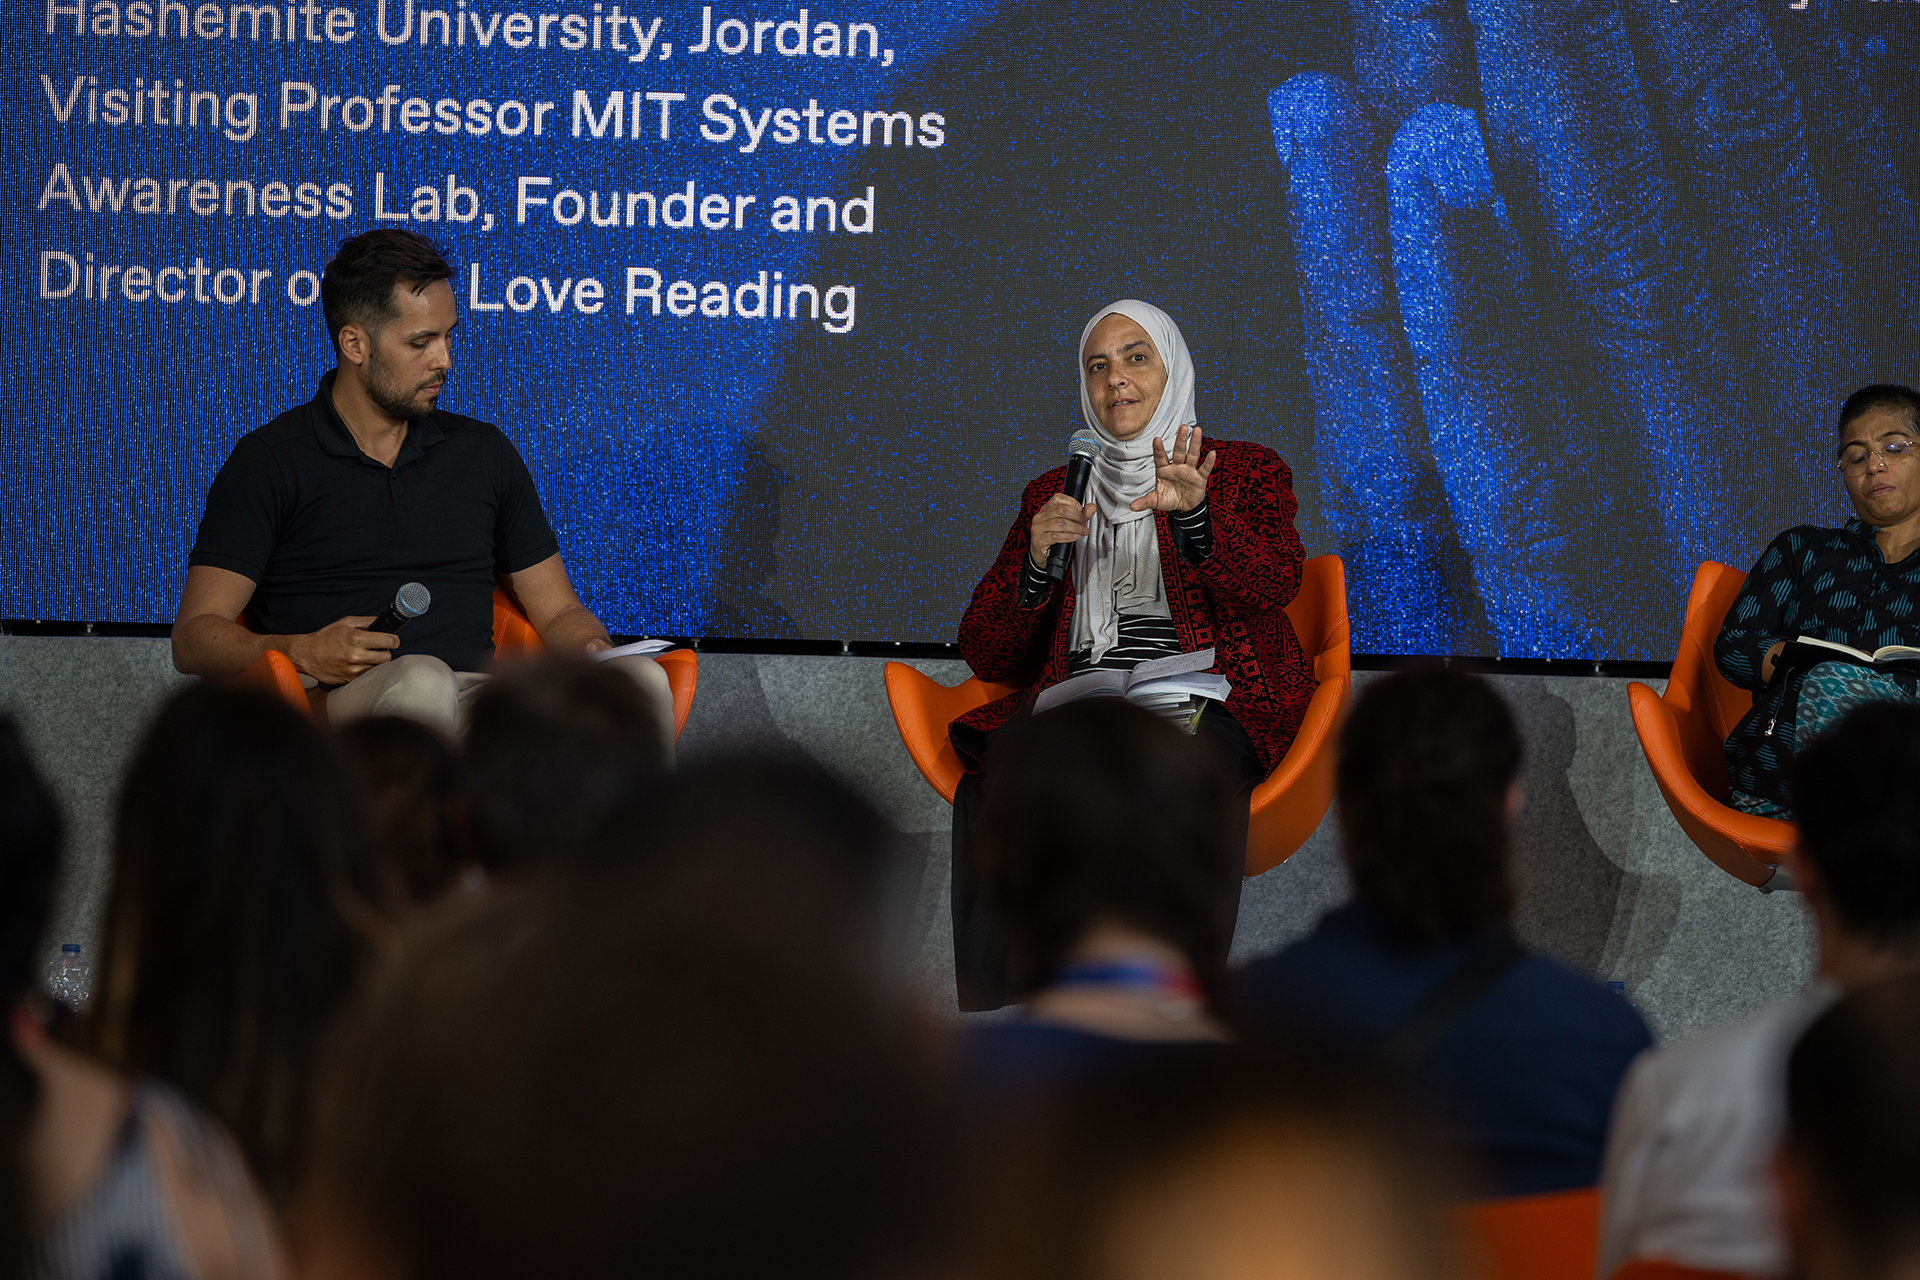 Michael Nikonchuk (left) and Rana Dajani (center) sit on the panel. The microphone is held by Rana Dajani who has her notes on her lap.